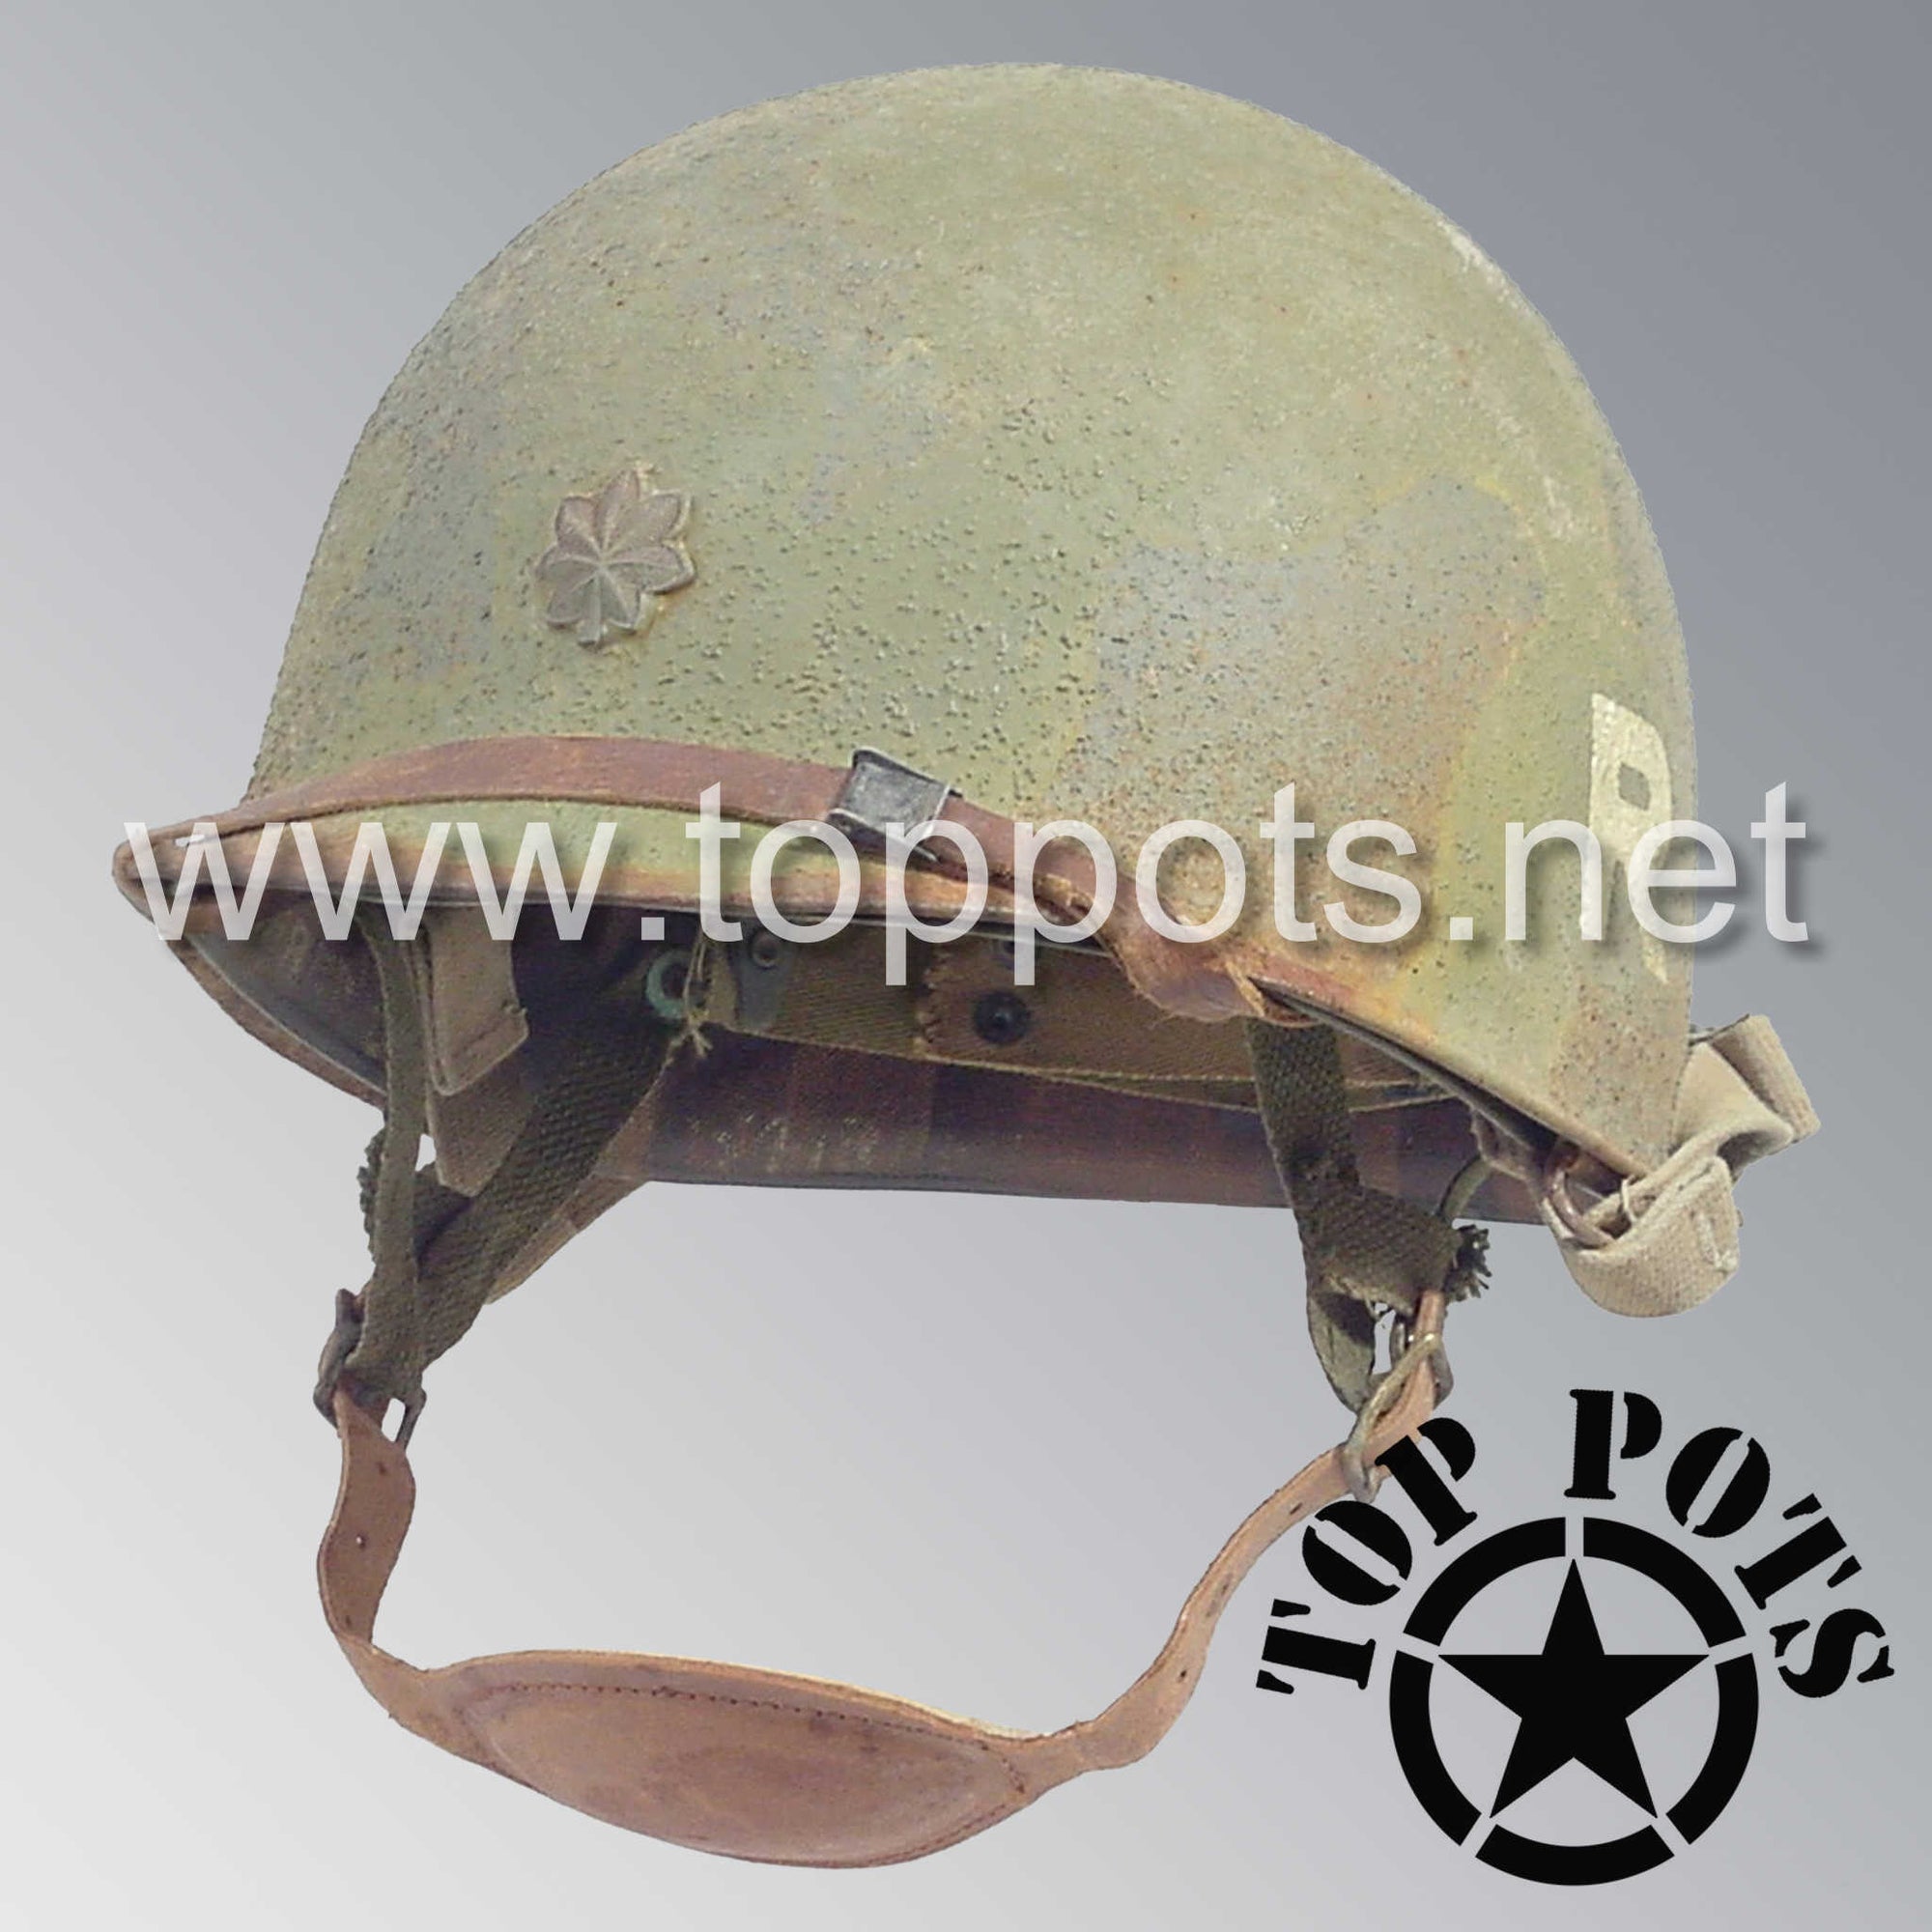 WWII US Army Aged Original M1C Paratrooper Airborne Helmet Swivel Bale Shell and Liner with 101st Airborne Reconnaissance Recon Platoon Officer Emblem